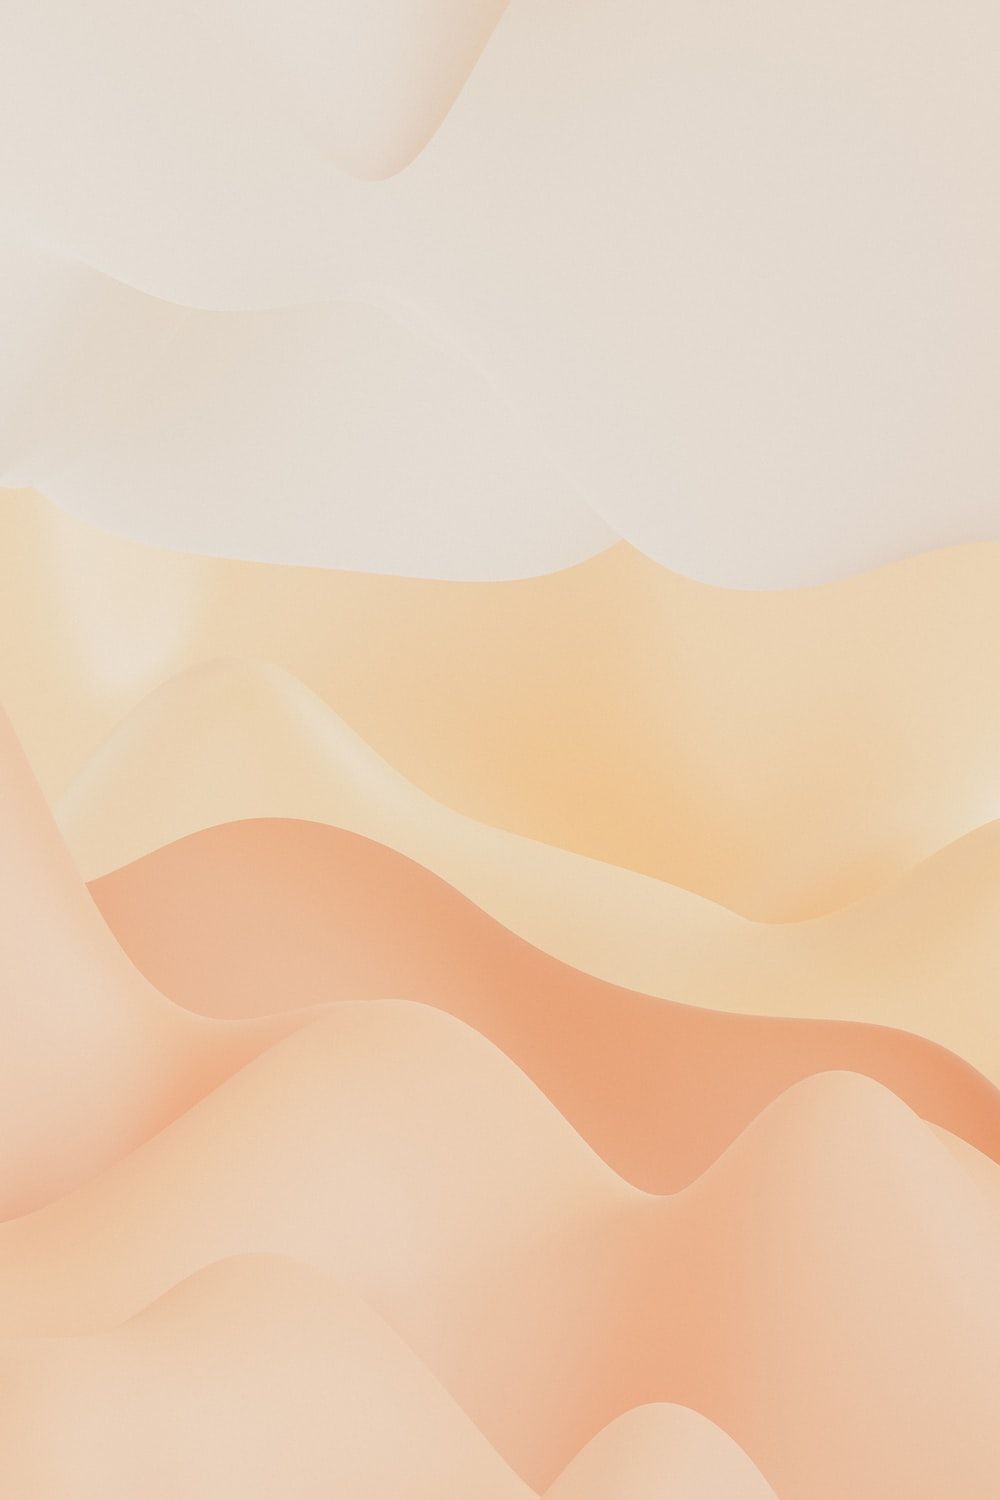 A desert scene with a white and orange background photo